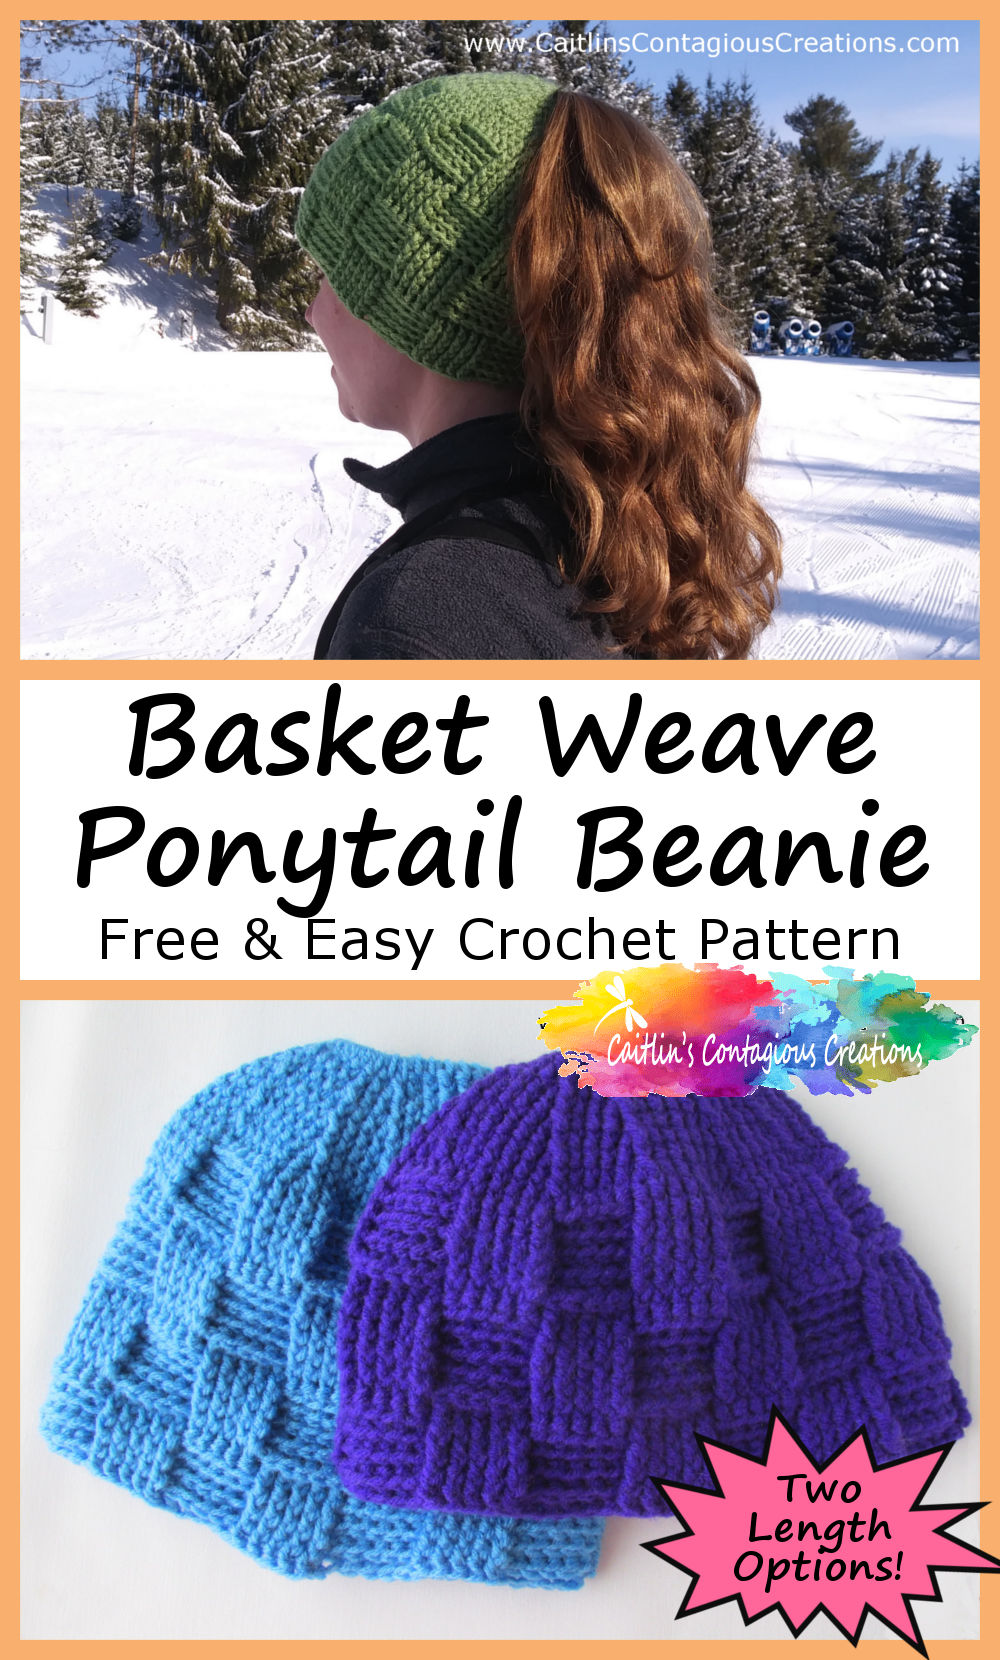 orange background with text overlay "Basket Weave POnytail beanie Free & Easy Crochet Pattern With Two Length options" and photos of hat in use